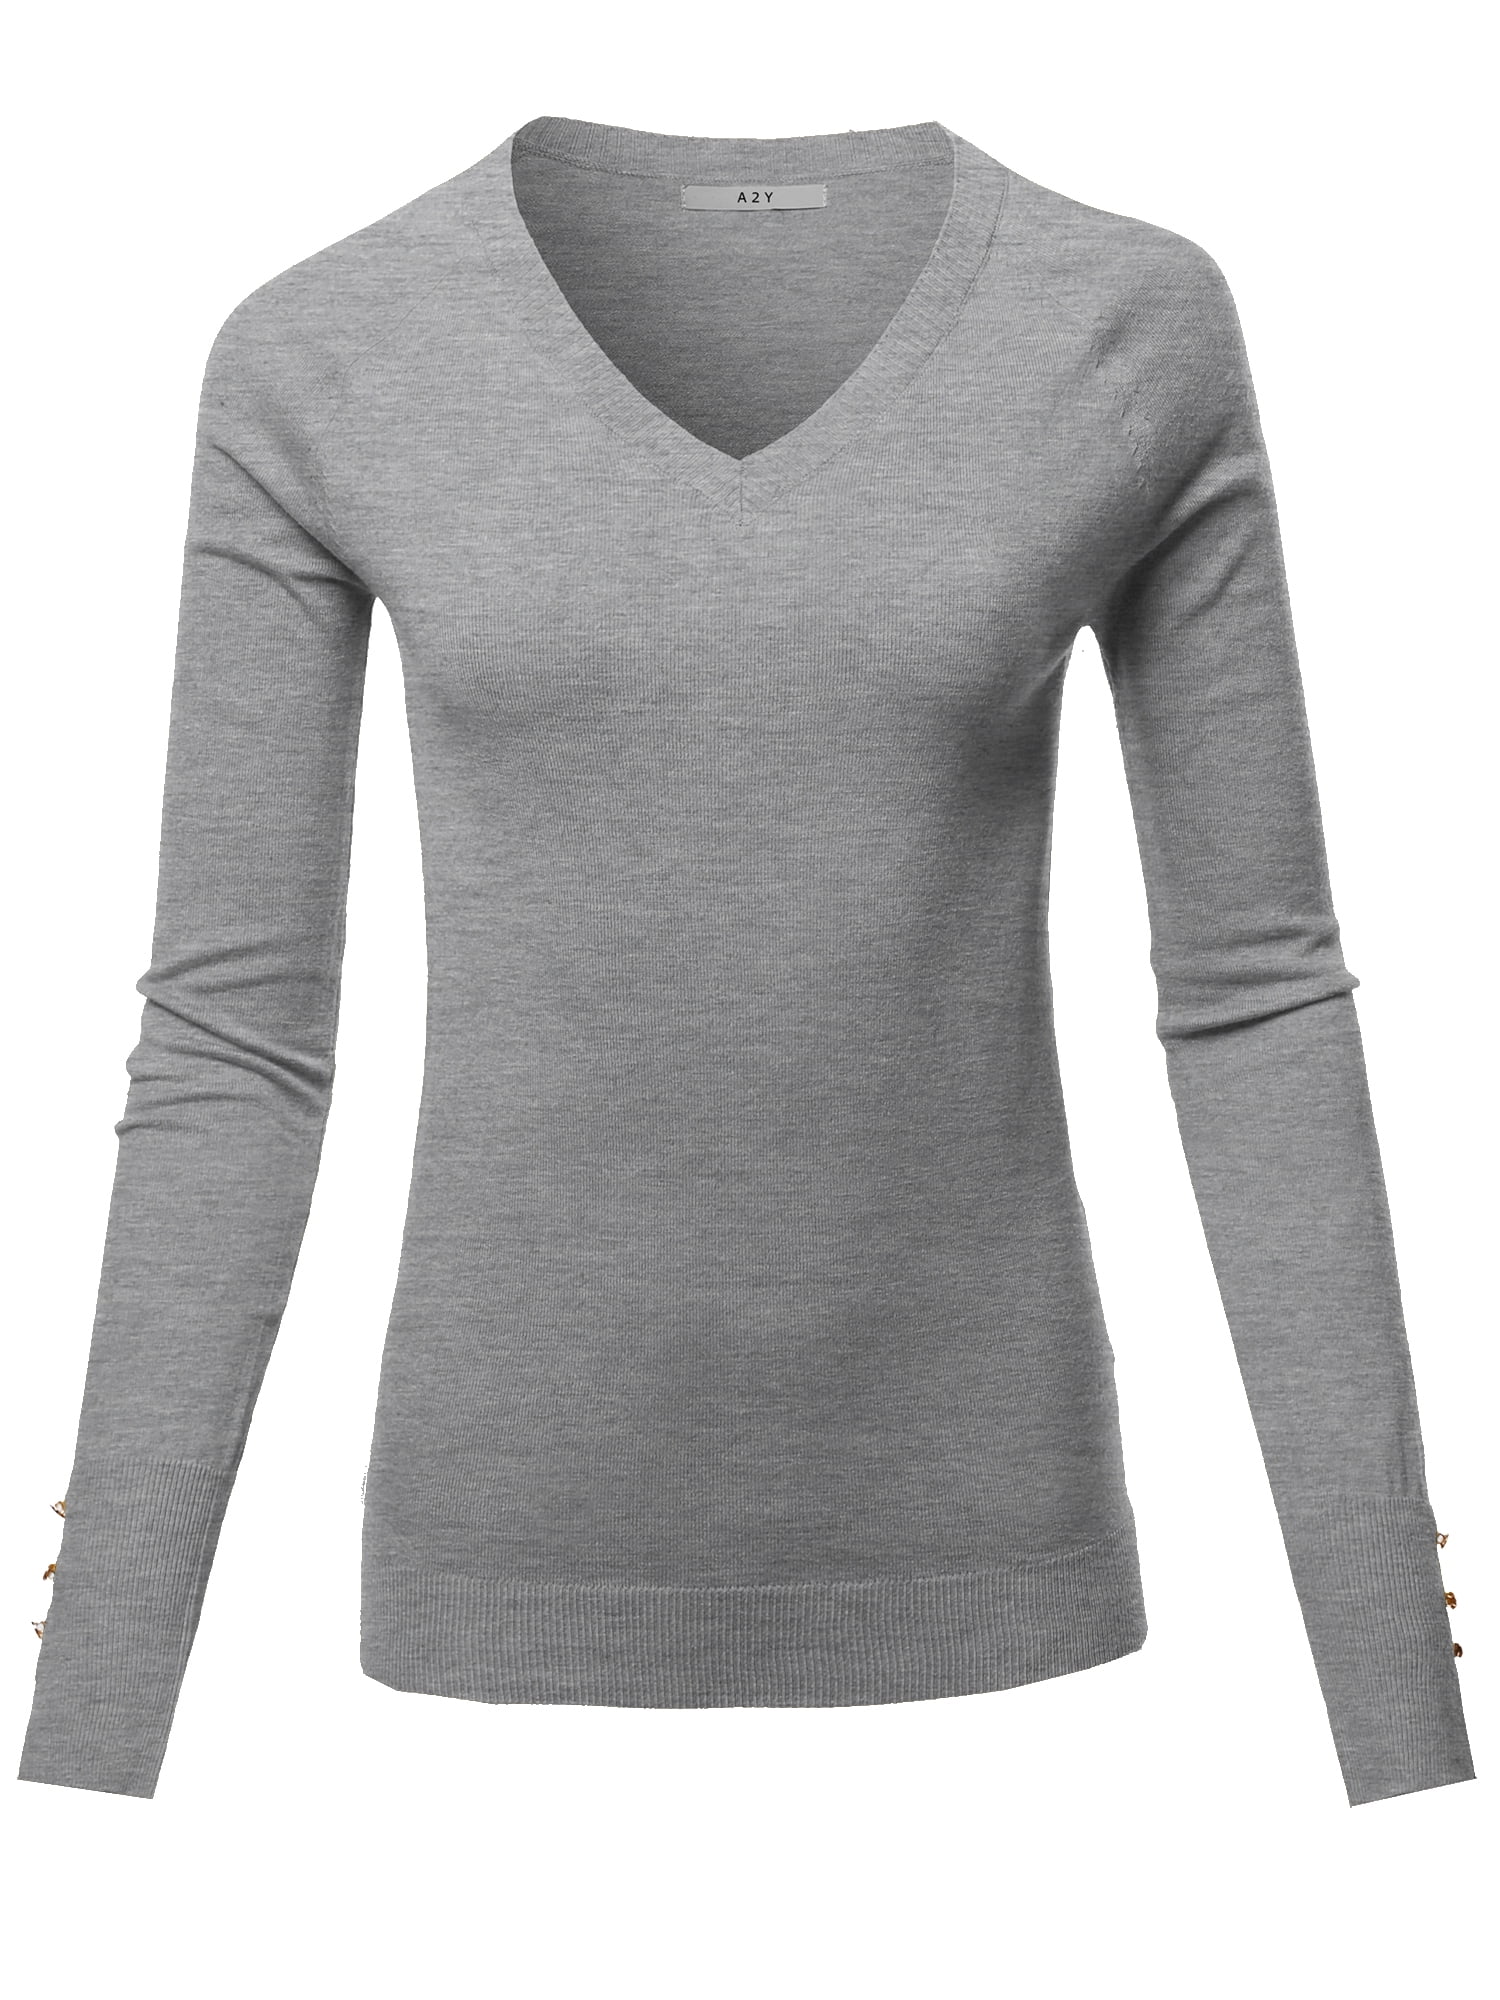 A2Y Women's Fitted Viscose V-Neck Long Sleeve Metal Button Detail ...